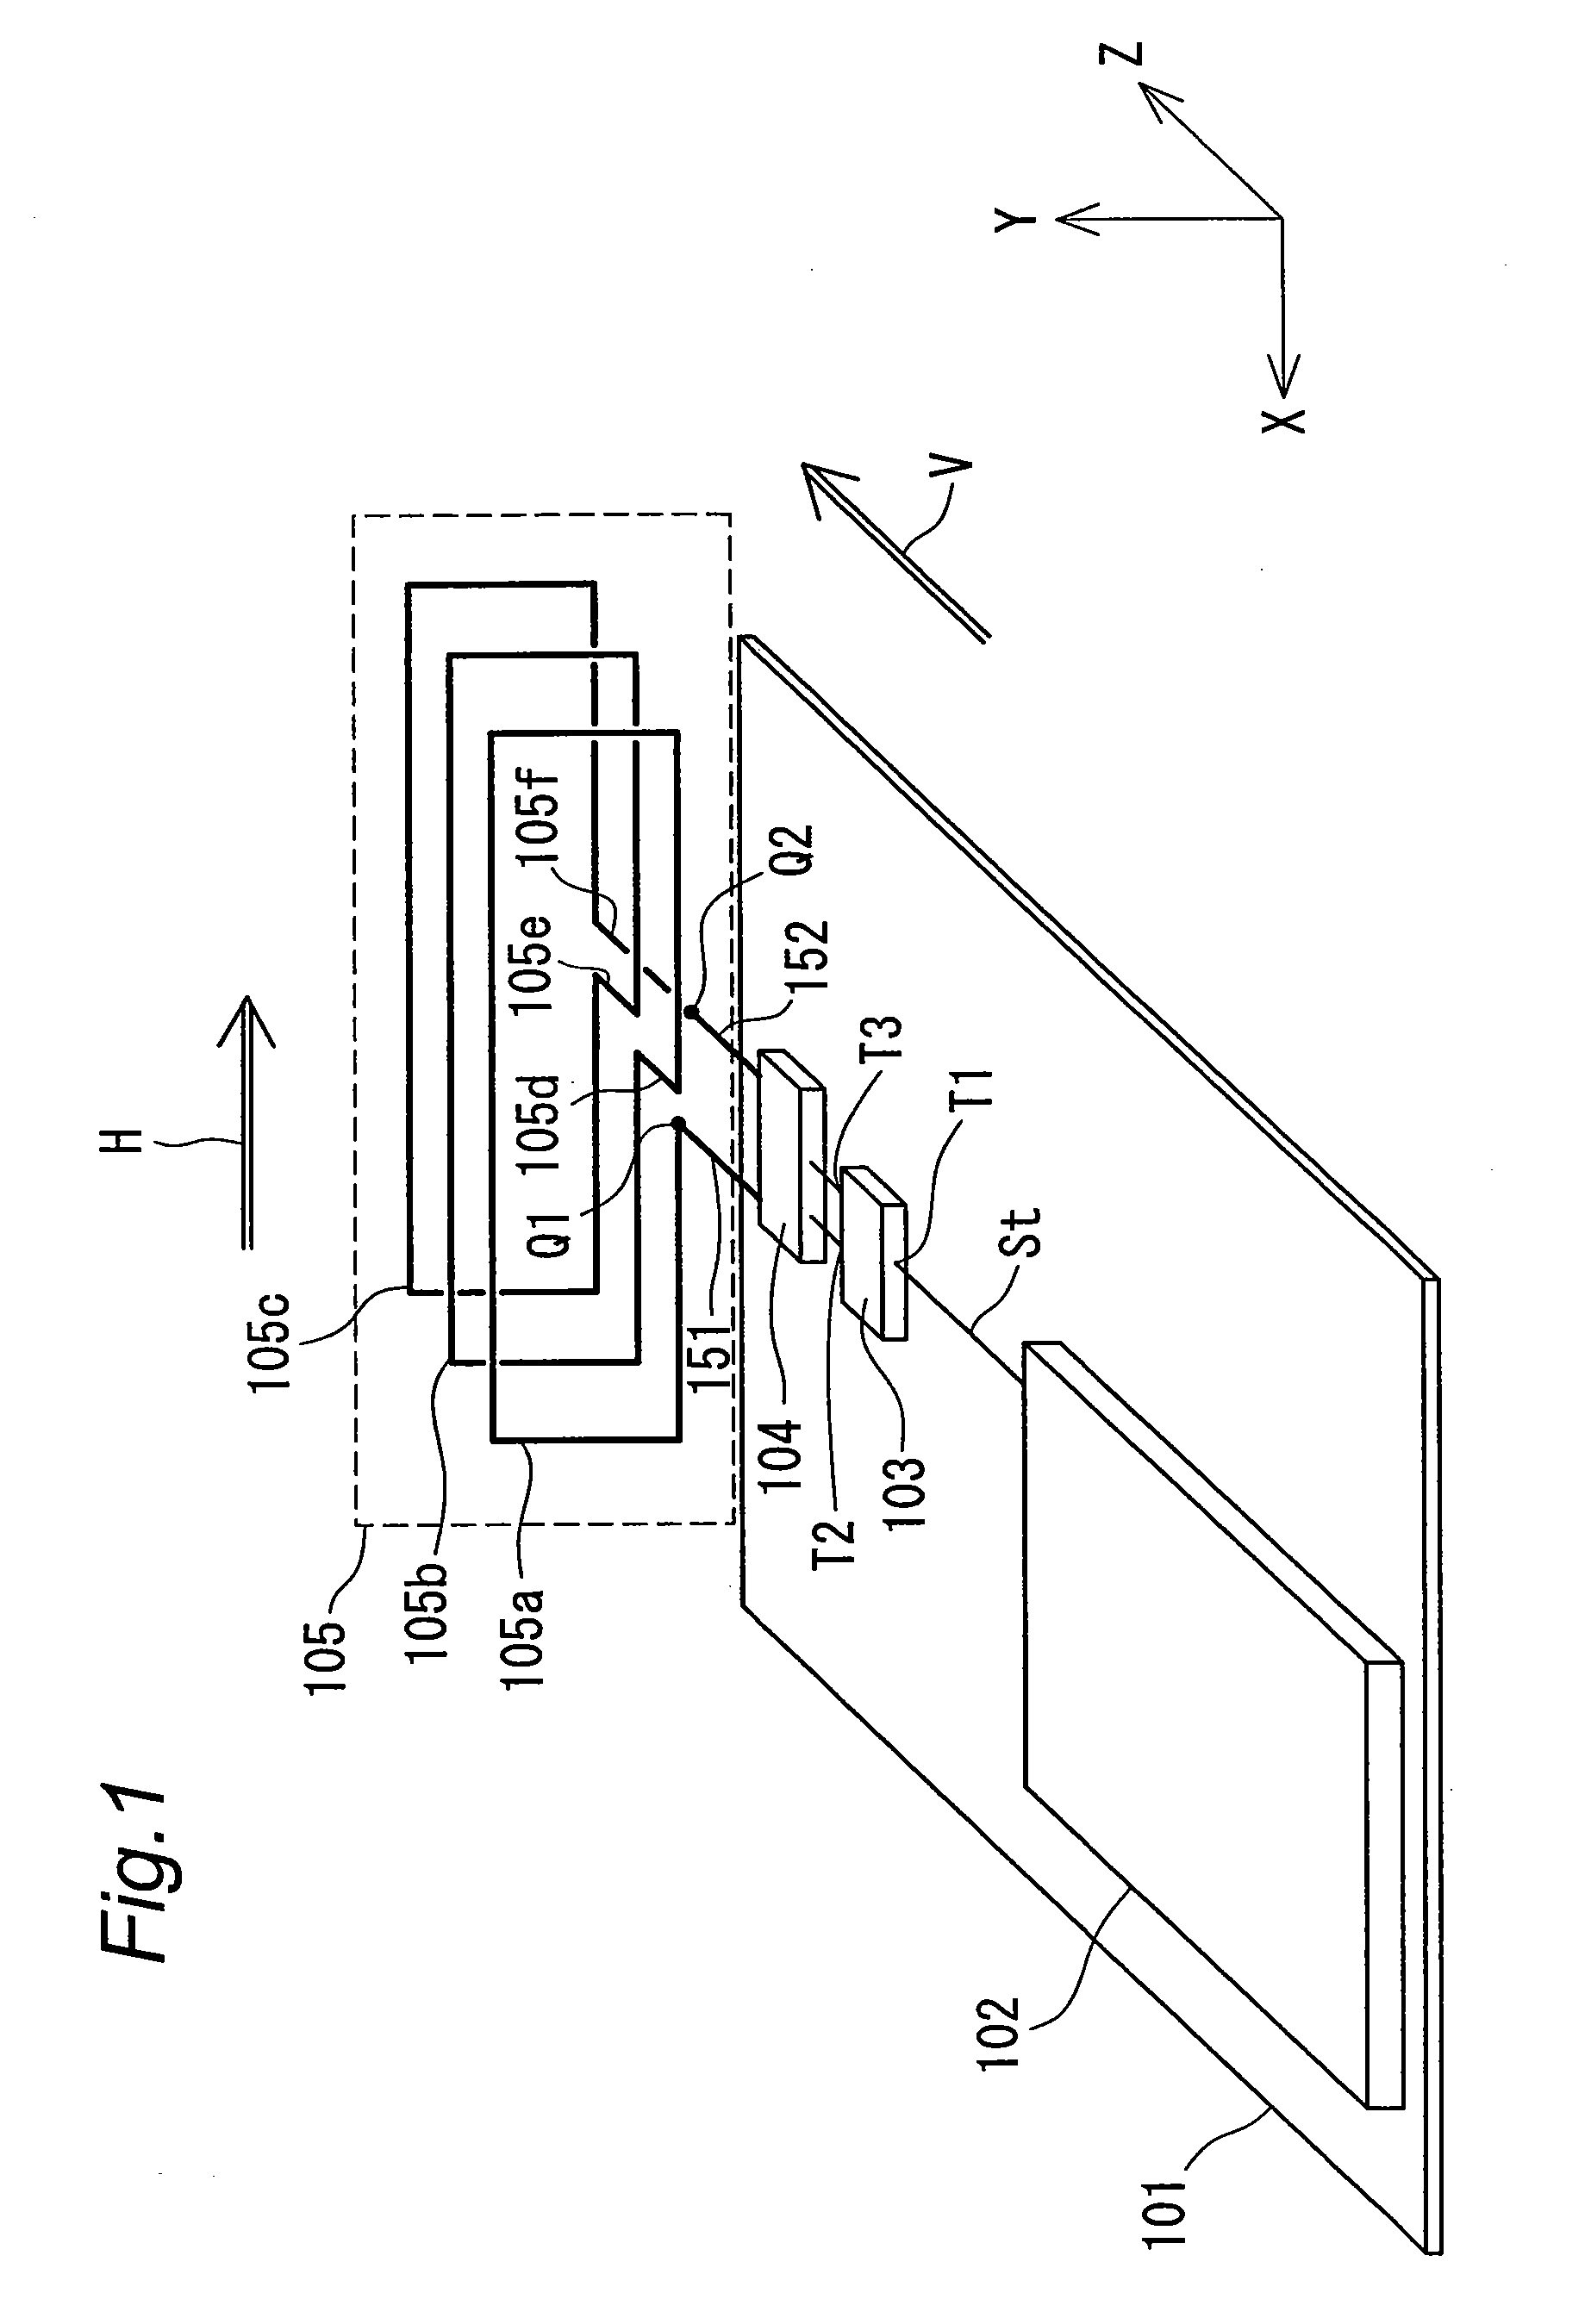 Antenna apparatus utilizing small loop antenna element having munute length and two feeding points